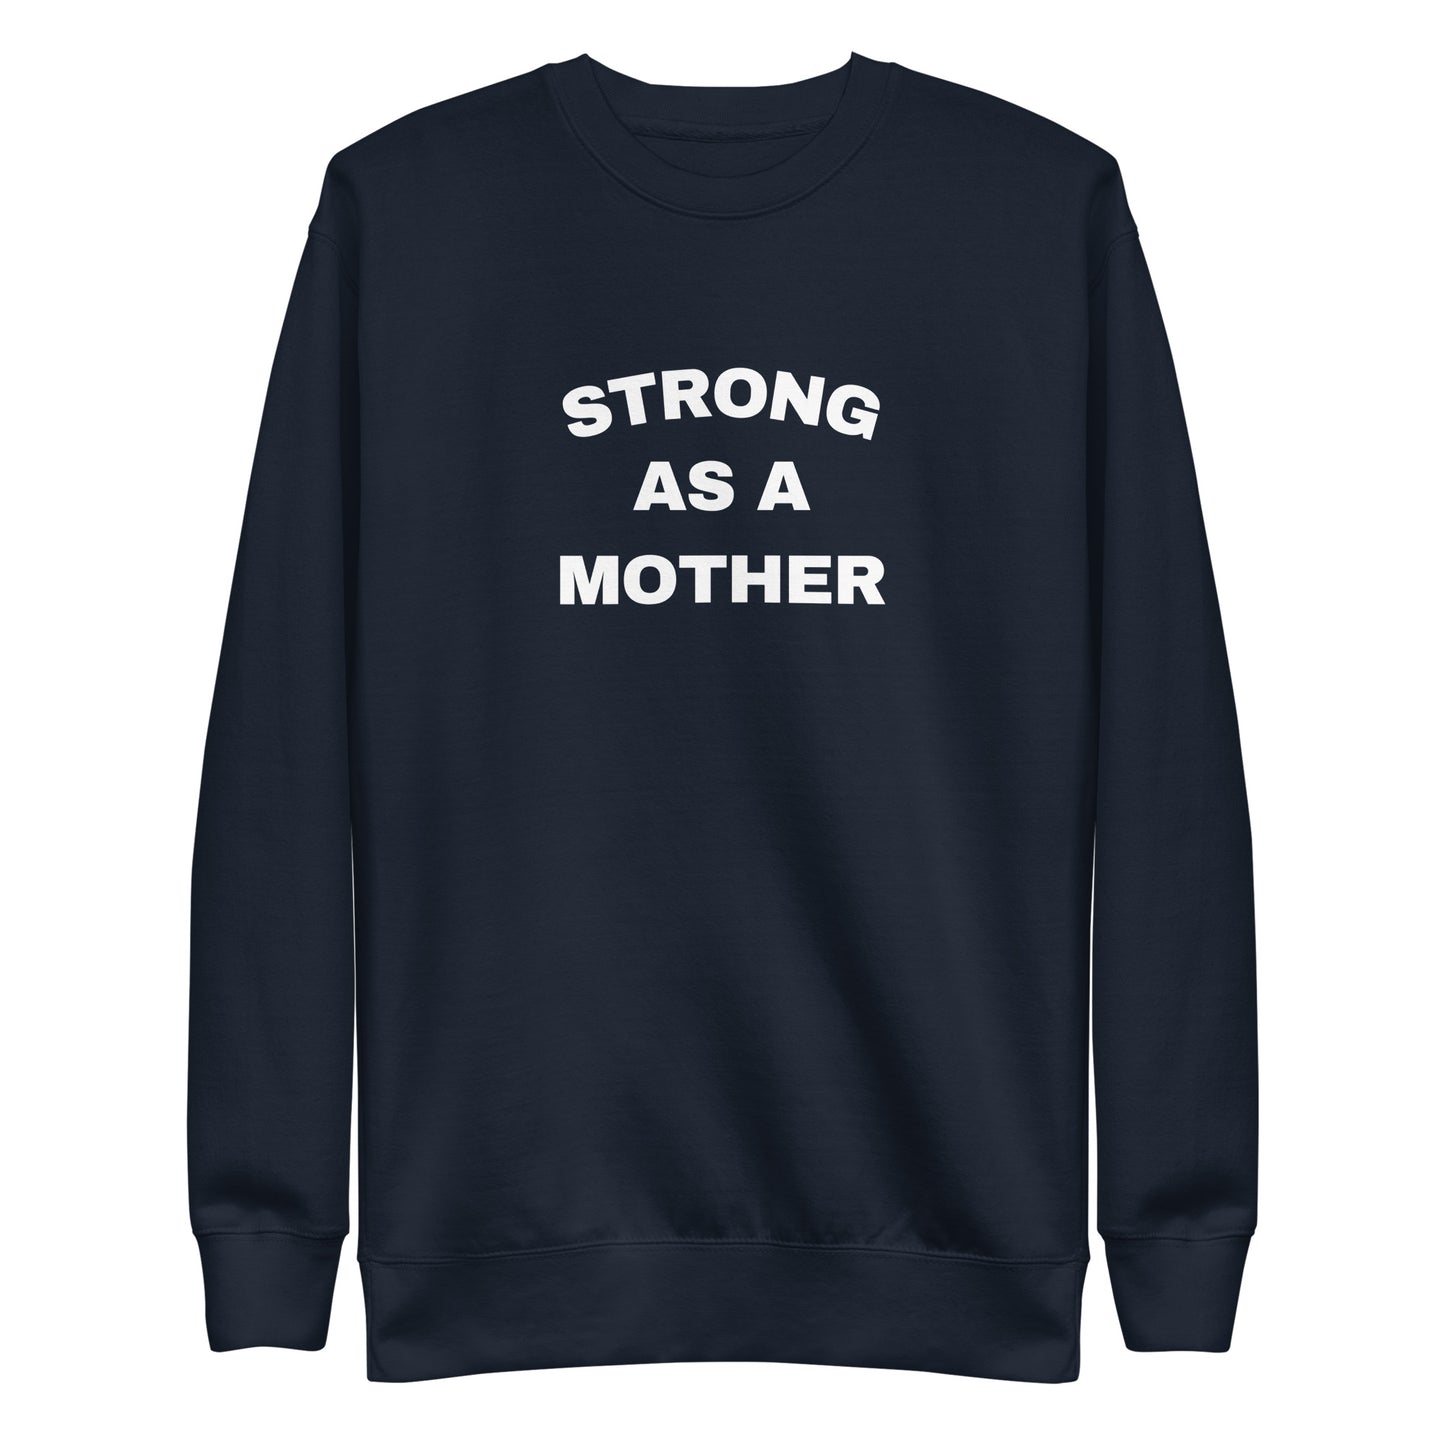 Strong as a Mother Sweatshirt | Art in Aging